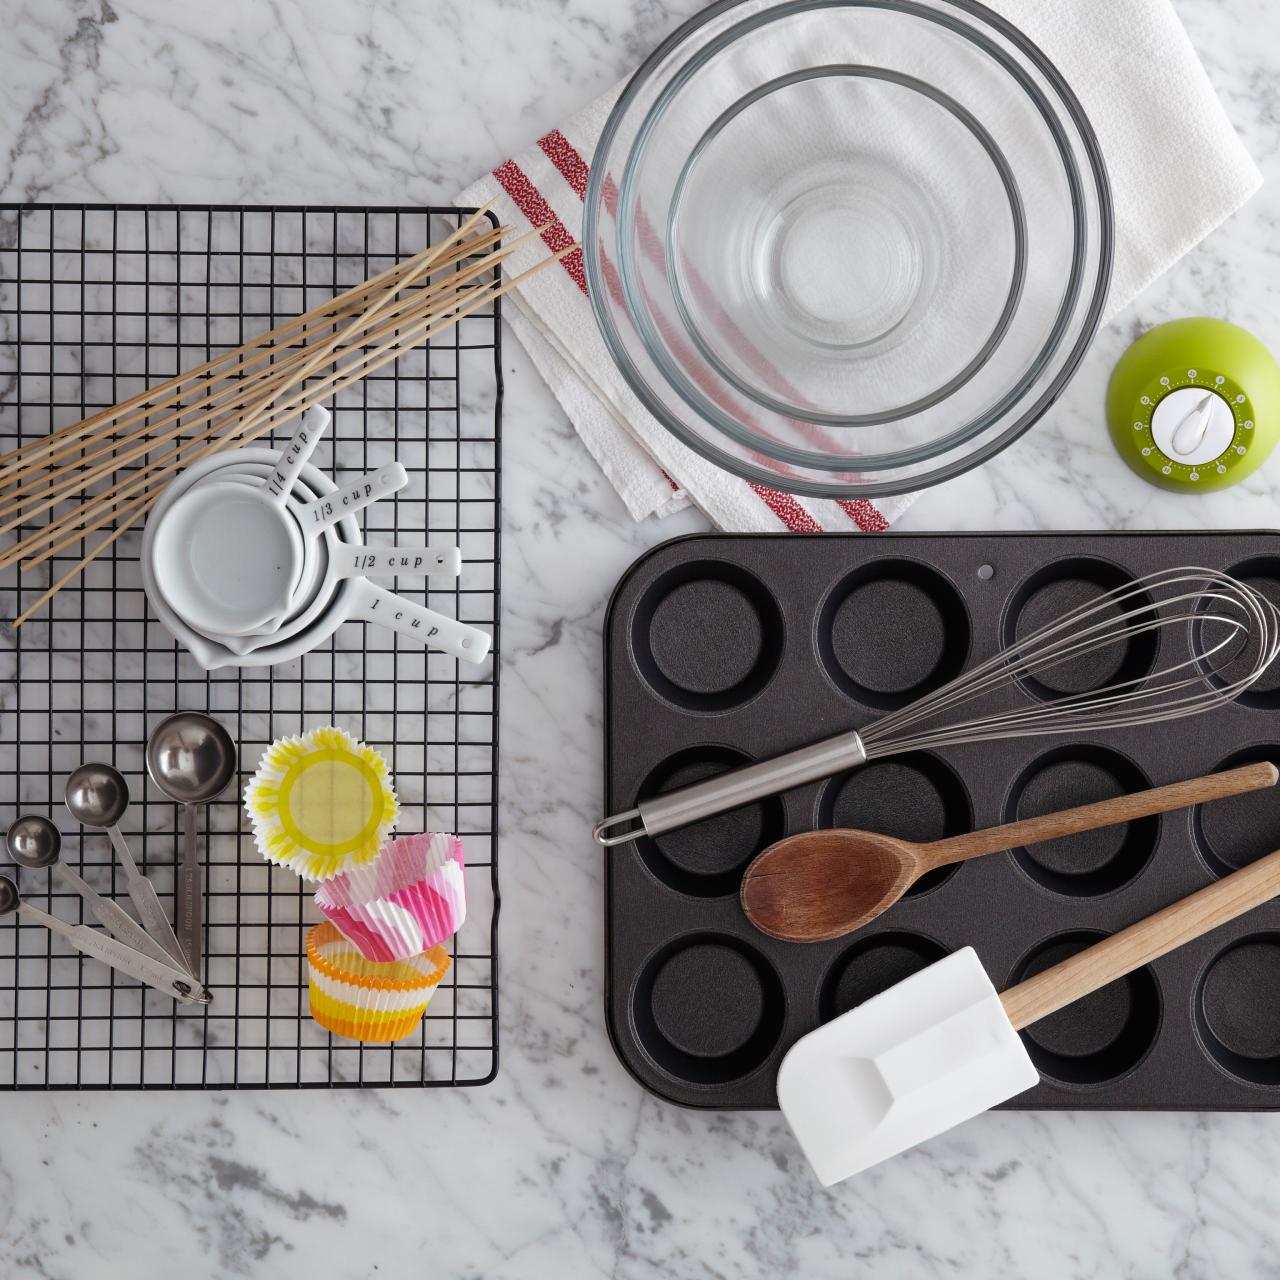 Baking Essentials: Must-Have Tools for Every Baker